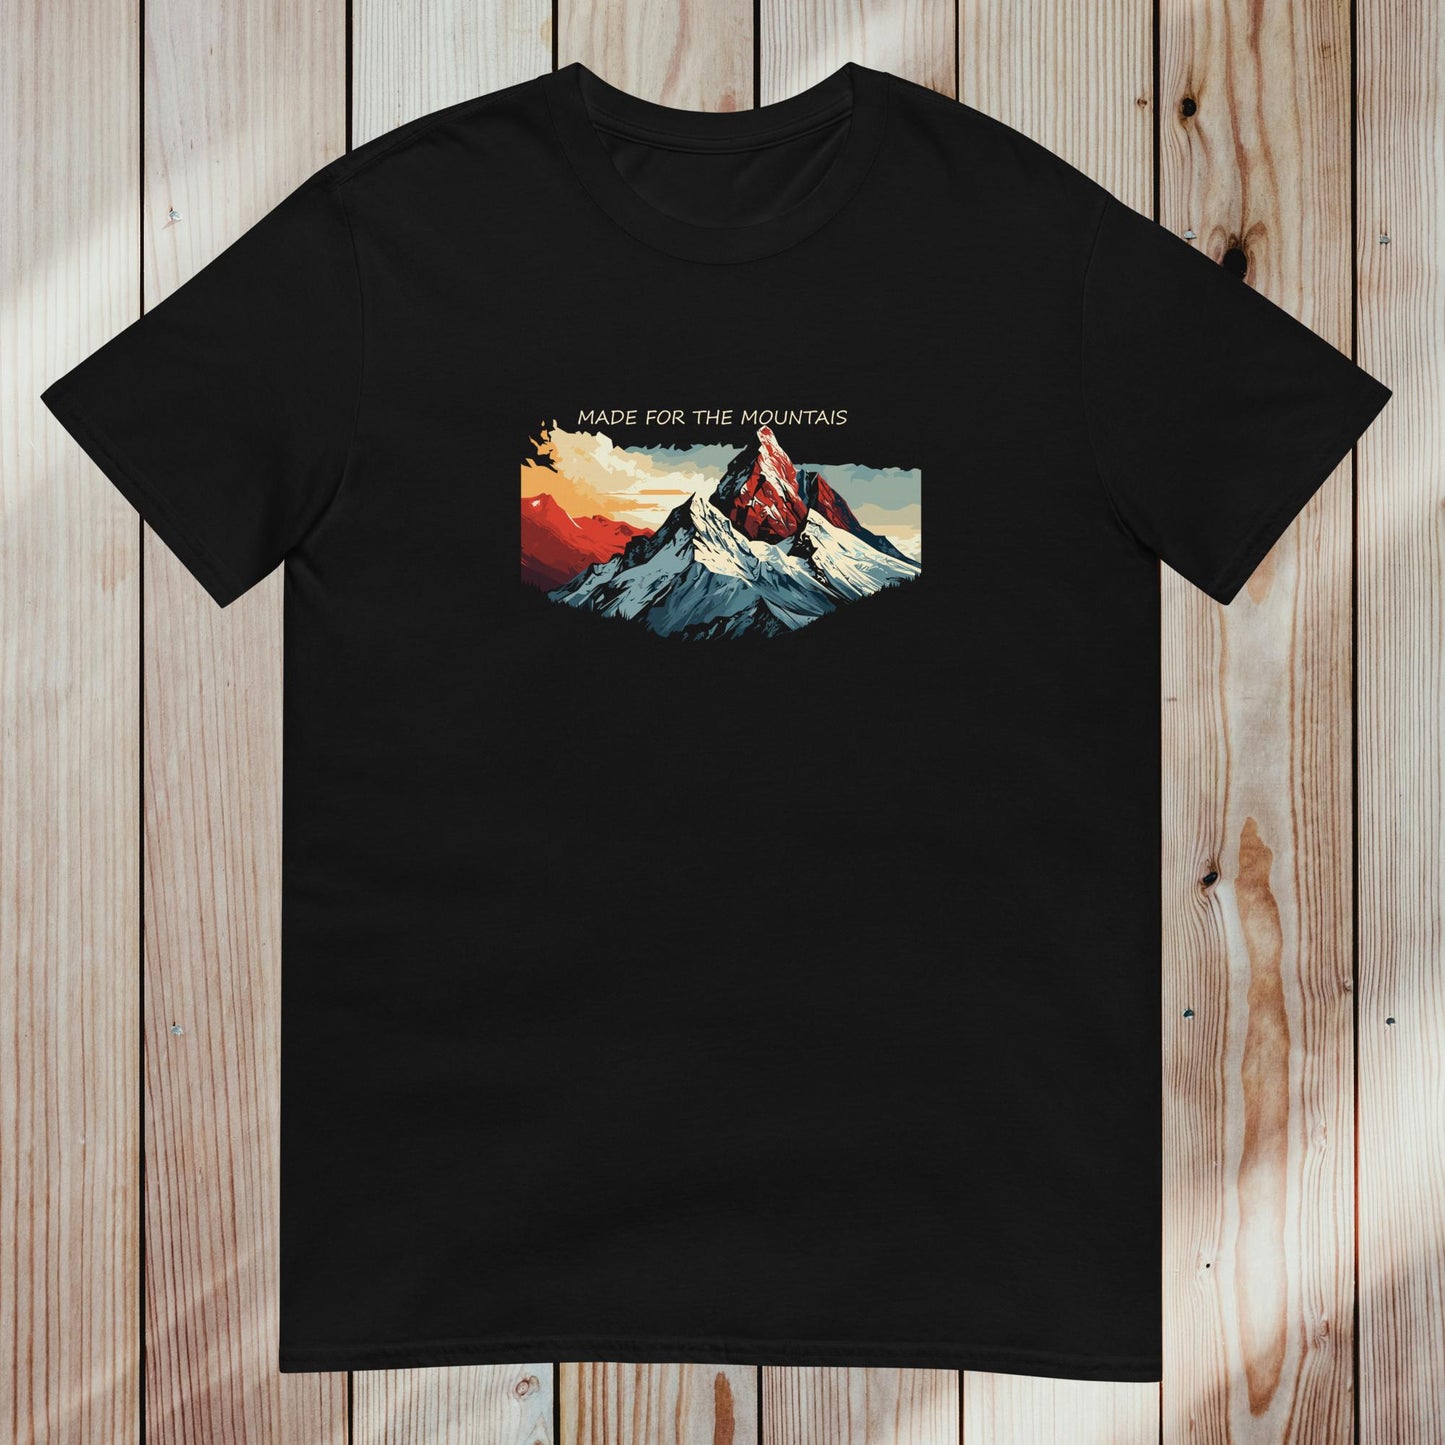 Unisex T-shirt: "Made for the mountains" 3